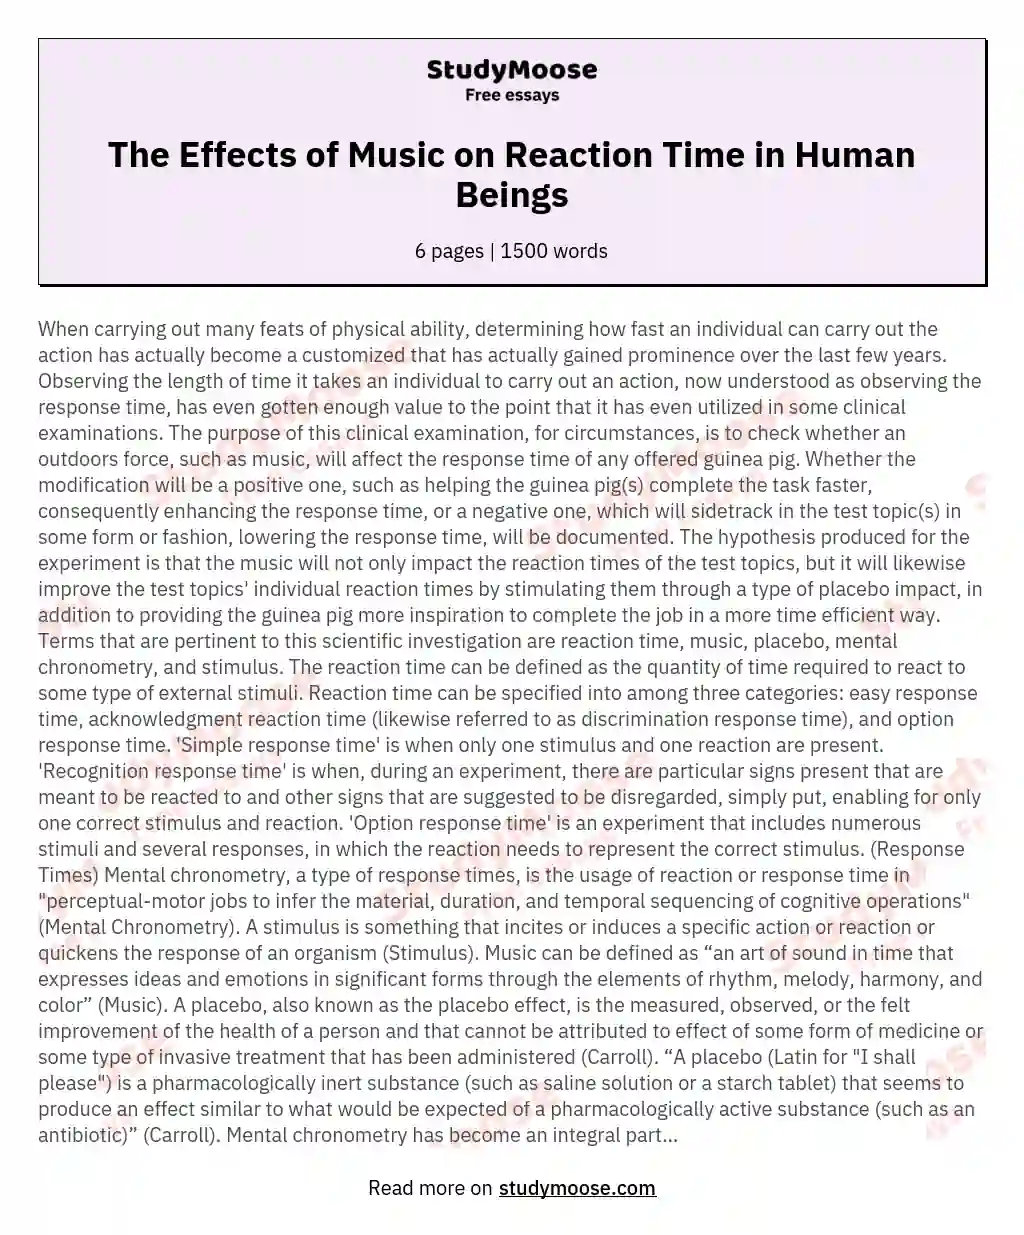 The Effects of Music on Reaction Time in Human Beings essay